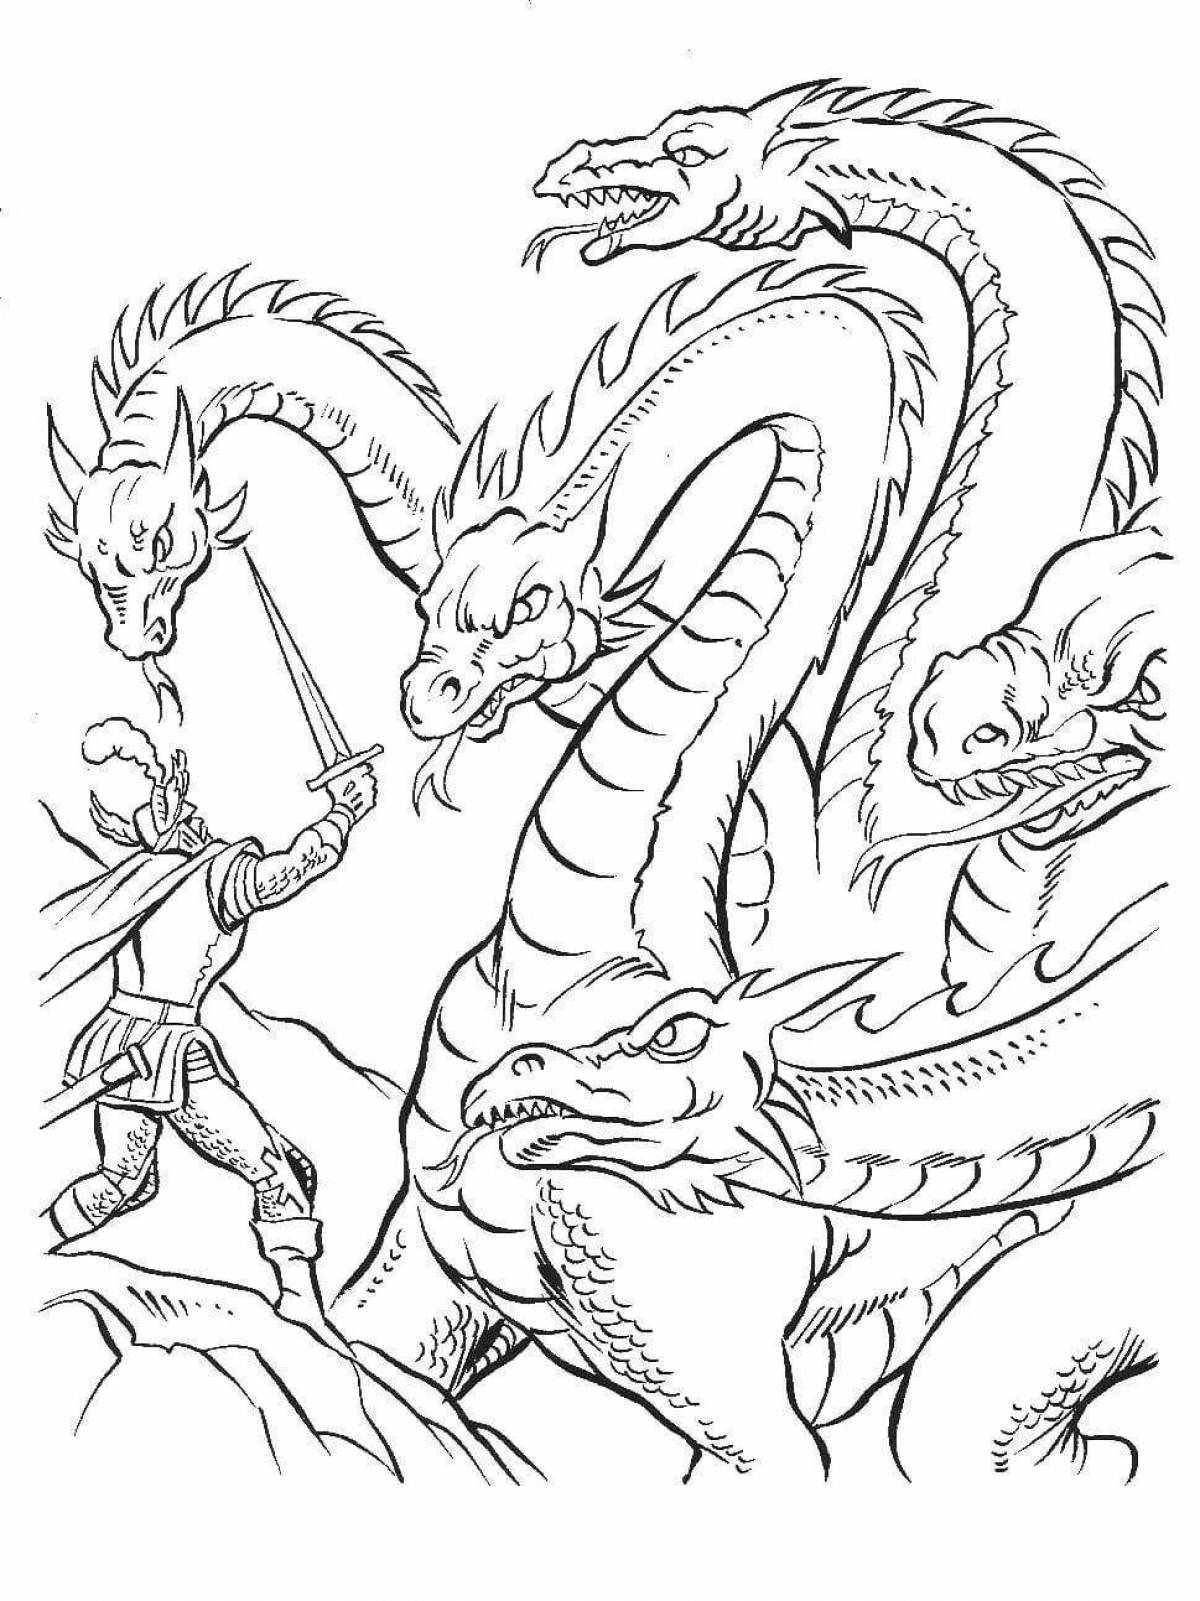 Exquisite three-headed dragon coloring page